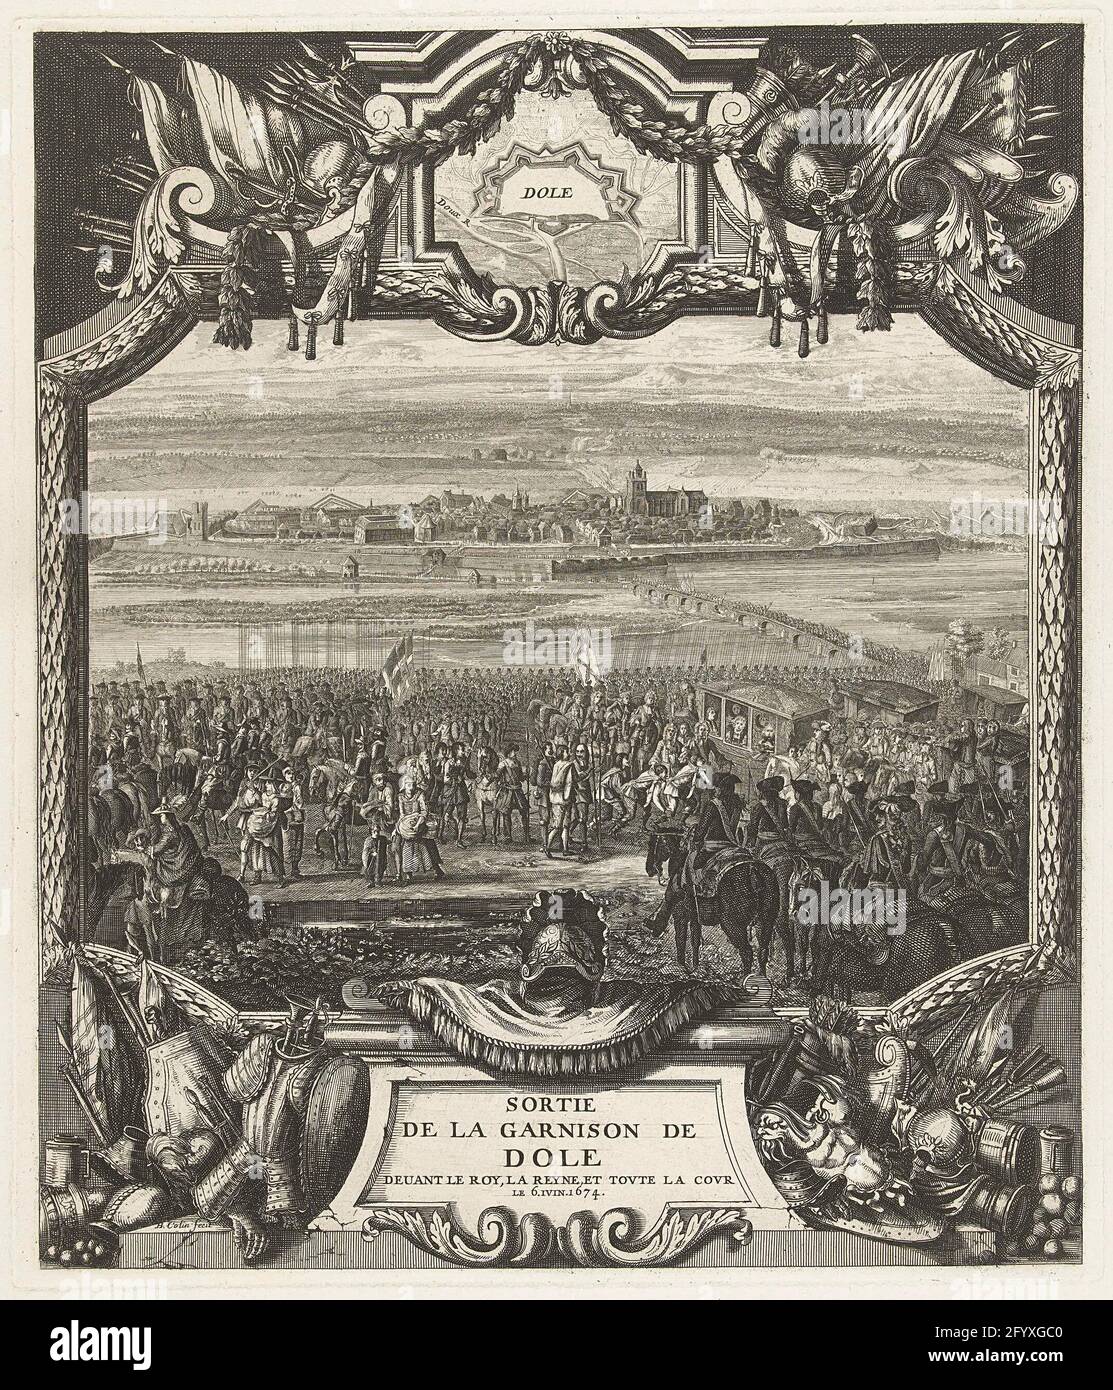 Intake of the city Dole by the French troops, 1674; Sortie de la Garnison de Dole. View of the city Dole that is taken by the French troops under Louis XIV. The army attracts the city through a bridge over the fortification. On the other side of the canal is a coach with Louis XIV and its queen. In a frame with weapon and laurel wreaths. Above the show a cartouche with the perimeter of the fortified city Dole and the course of the river Doubs. Stock Photo